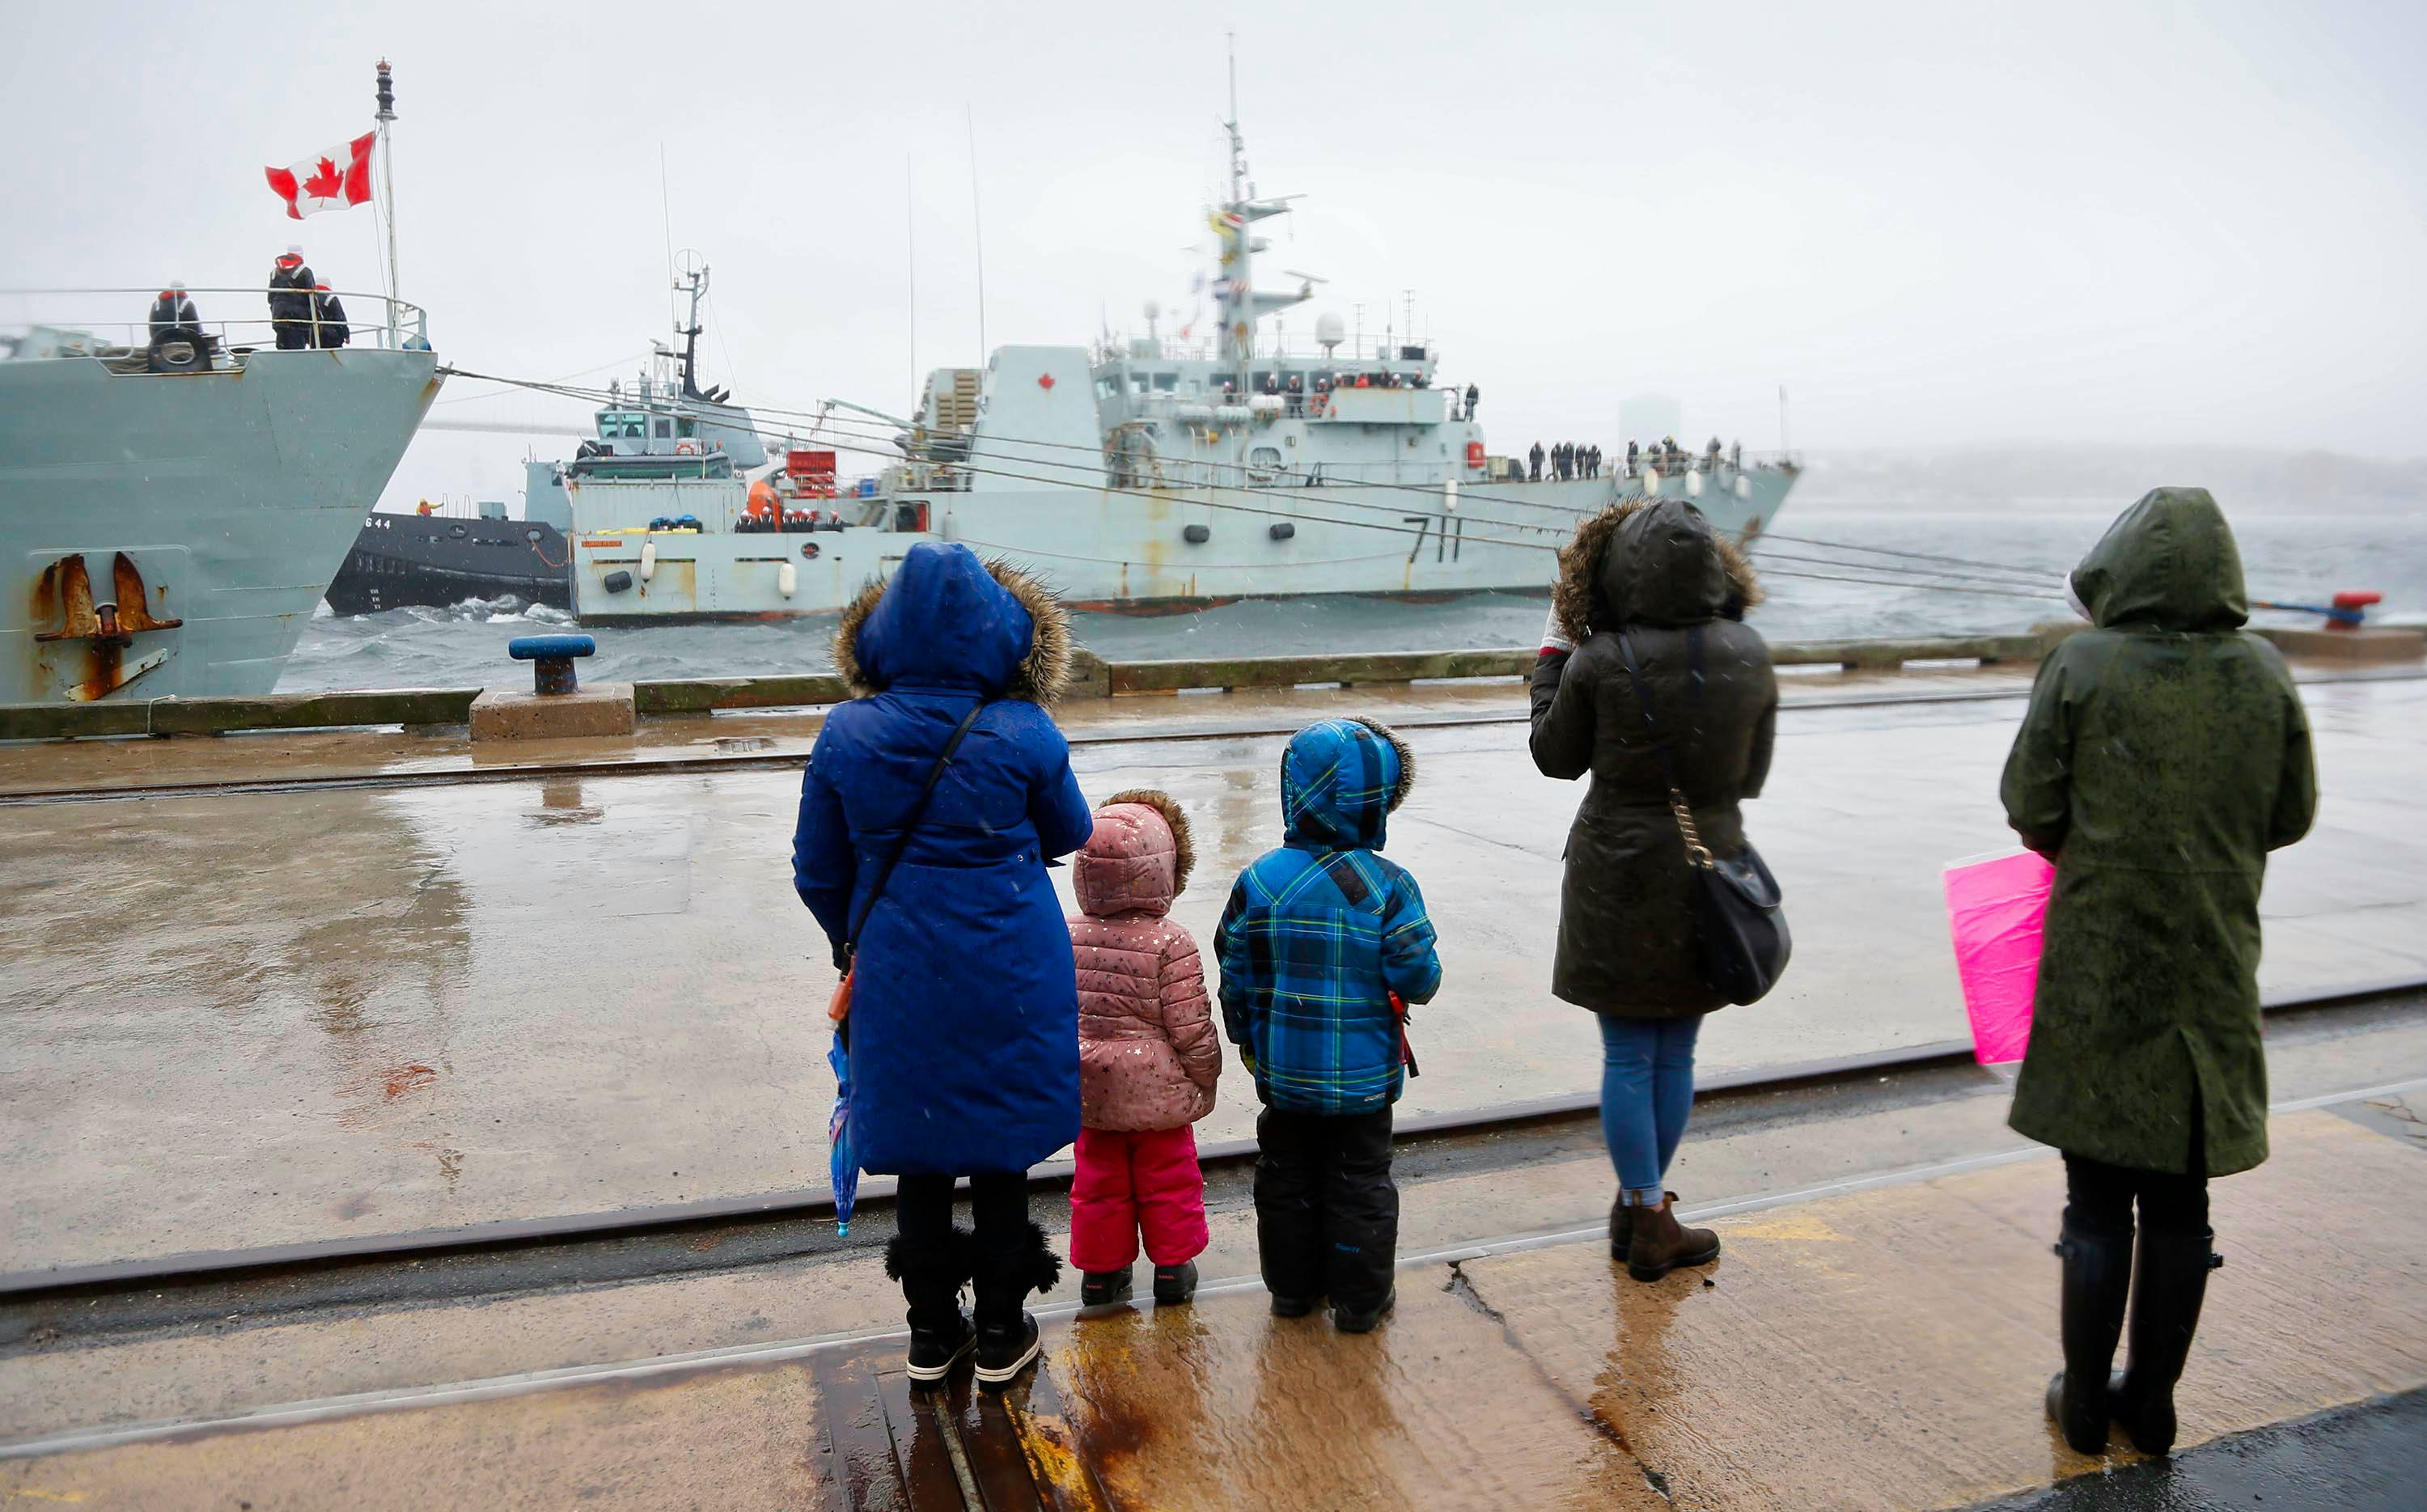 Family members look on as HMCS Summerside is pushed towards a jetty, following it’s arrival at HMC Dockyard in Halifax Tuesday April 17, 2018. Along with HMCS Kingston, the 2 returned to Halifax after a 3-month deployment to West Africa. 

Tim Krochak/The Chronicle Herald